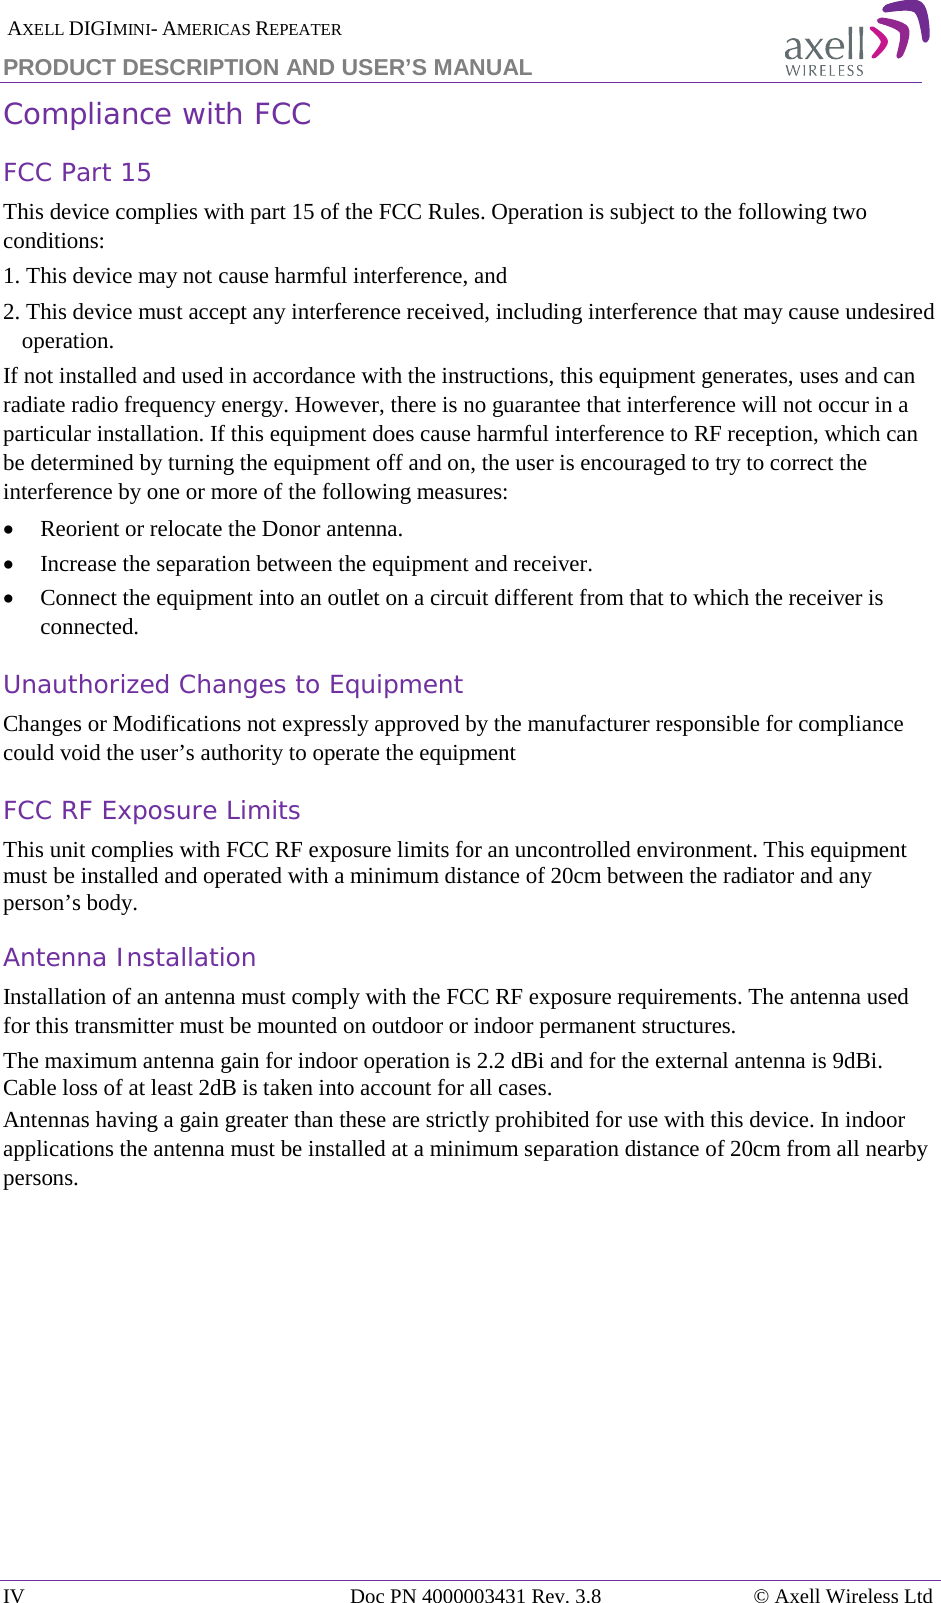  AXELL DIGIMINI- AMERICAS REPEATER PRODUCT DESCRIPTION AND USER’S MANUAL IV Doc PN 4000003431 Rev. 3.8 © Axell Wireless Ltd  Compliance with FCC FCC Part 15 This device complies with part 15 of the FCC Rules. Operation is subject to the following two conditions:  1. This device may not cause harmful interference, and   2. This device must accept any interference received, including interference that may cause undesired operation.  If not installed and used in accordance with the instructions, this equipment generates, uses and can radiate radio frequency energy. However, there is no guarantee that interference will not occur in a particular installation. If this equipment does cause harmful interference to RF reception, which can be determined by turning the equipment off and on, the user is encouraged to try to correct the interference by one or more of the following measures: • Reorient or relocate the Donor antenna. • Increase the separation between the equipment and receiver. • Connect the equipment into an outlet on a circuit different from that to which the receiver is connected. Unauthorized Changes to Equipment Changes or Modifications not expressly approved by the manufacturer responsible for compliance could void the user’s authority to operate the equipment FCC RF Exposure Limits This unit complies with FCC RF exposure limits for an uncontrolled environment. This equipment must be installed and operated with a minimum distance of 20cm between the radiator and any person’s body.   Antenna Installation Installation of an antenna must comply with the FCC RF exposure requirements. The antenna used for this transmitter must be mounted on outdoor or indoor permanent structures. The maximum antenna gain for indoor operation is 2.2 dBi and for the external antenna is 9dBi. Cable loss of at least 2dB is taken into account for all cases. Antennas having a gain greater than these are strictly prohibited for use with this device. In indoor applications the antenna must be installed at a minimum separation distance of 20cm from all nearby persons.   